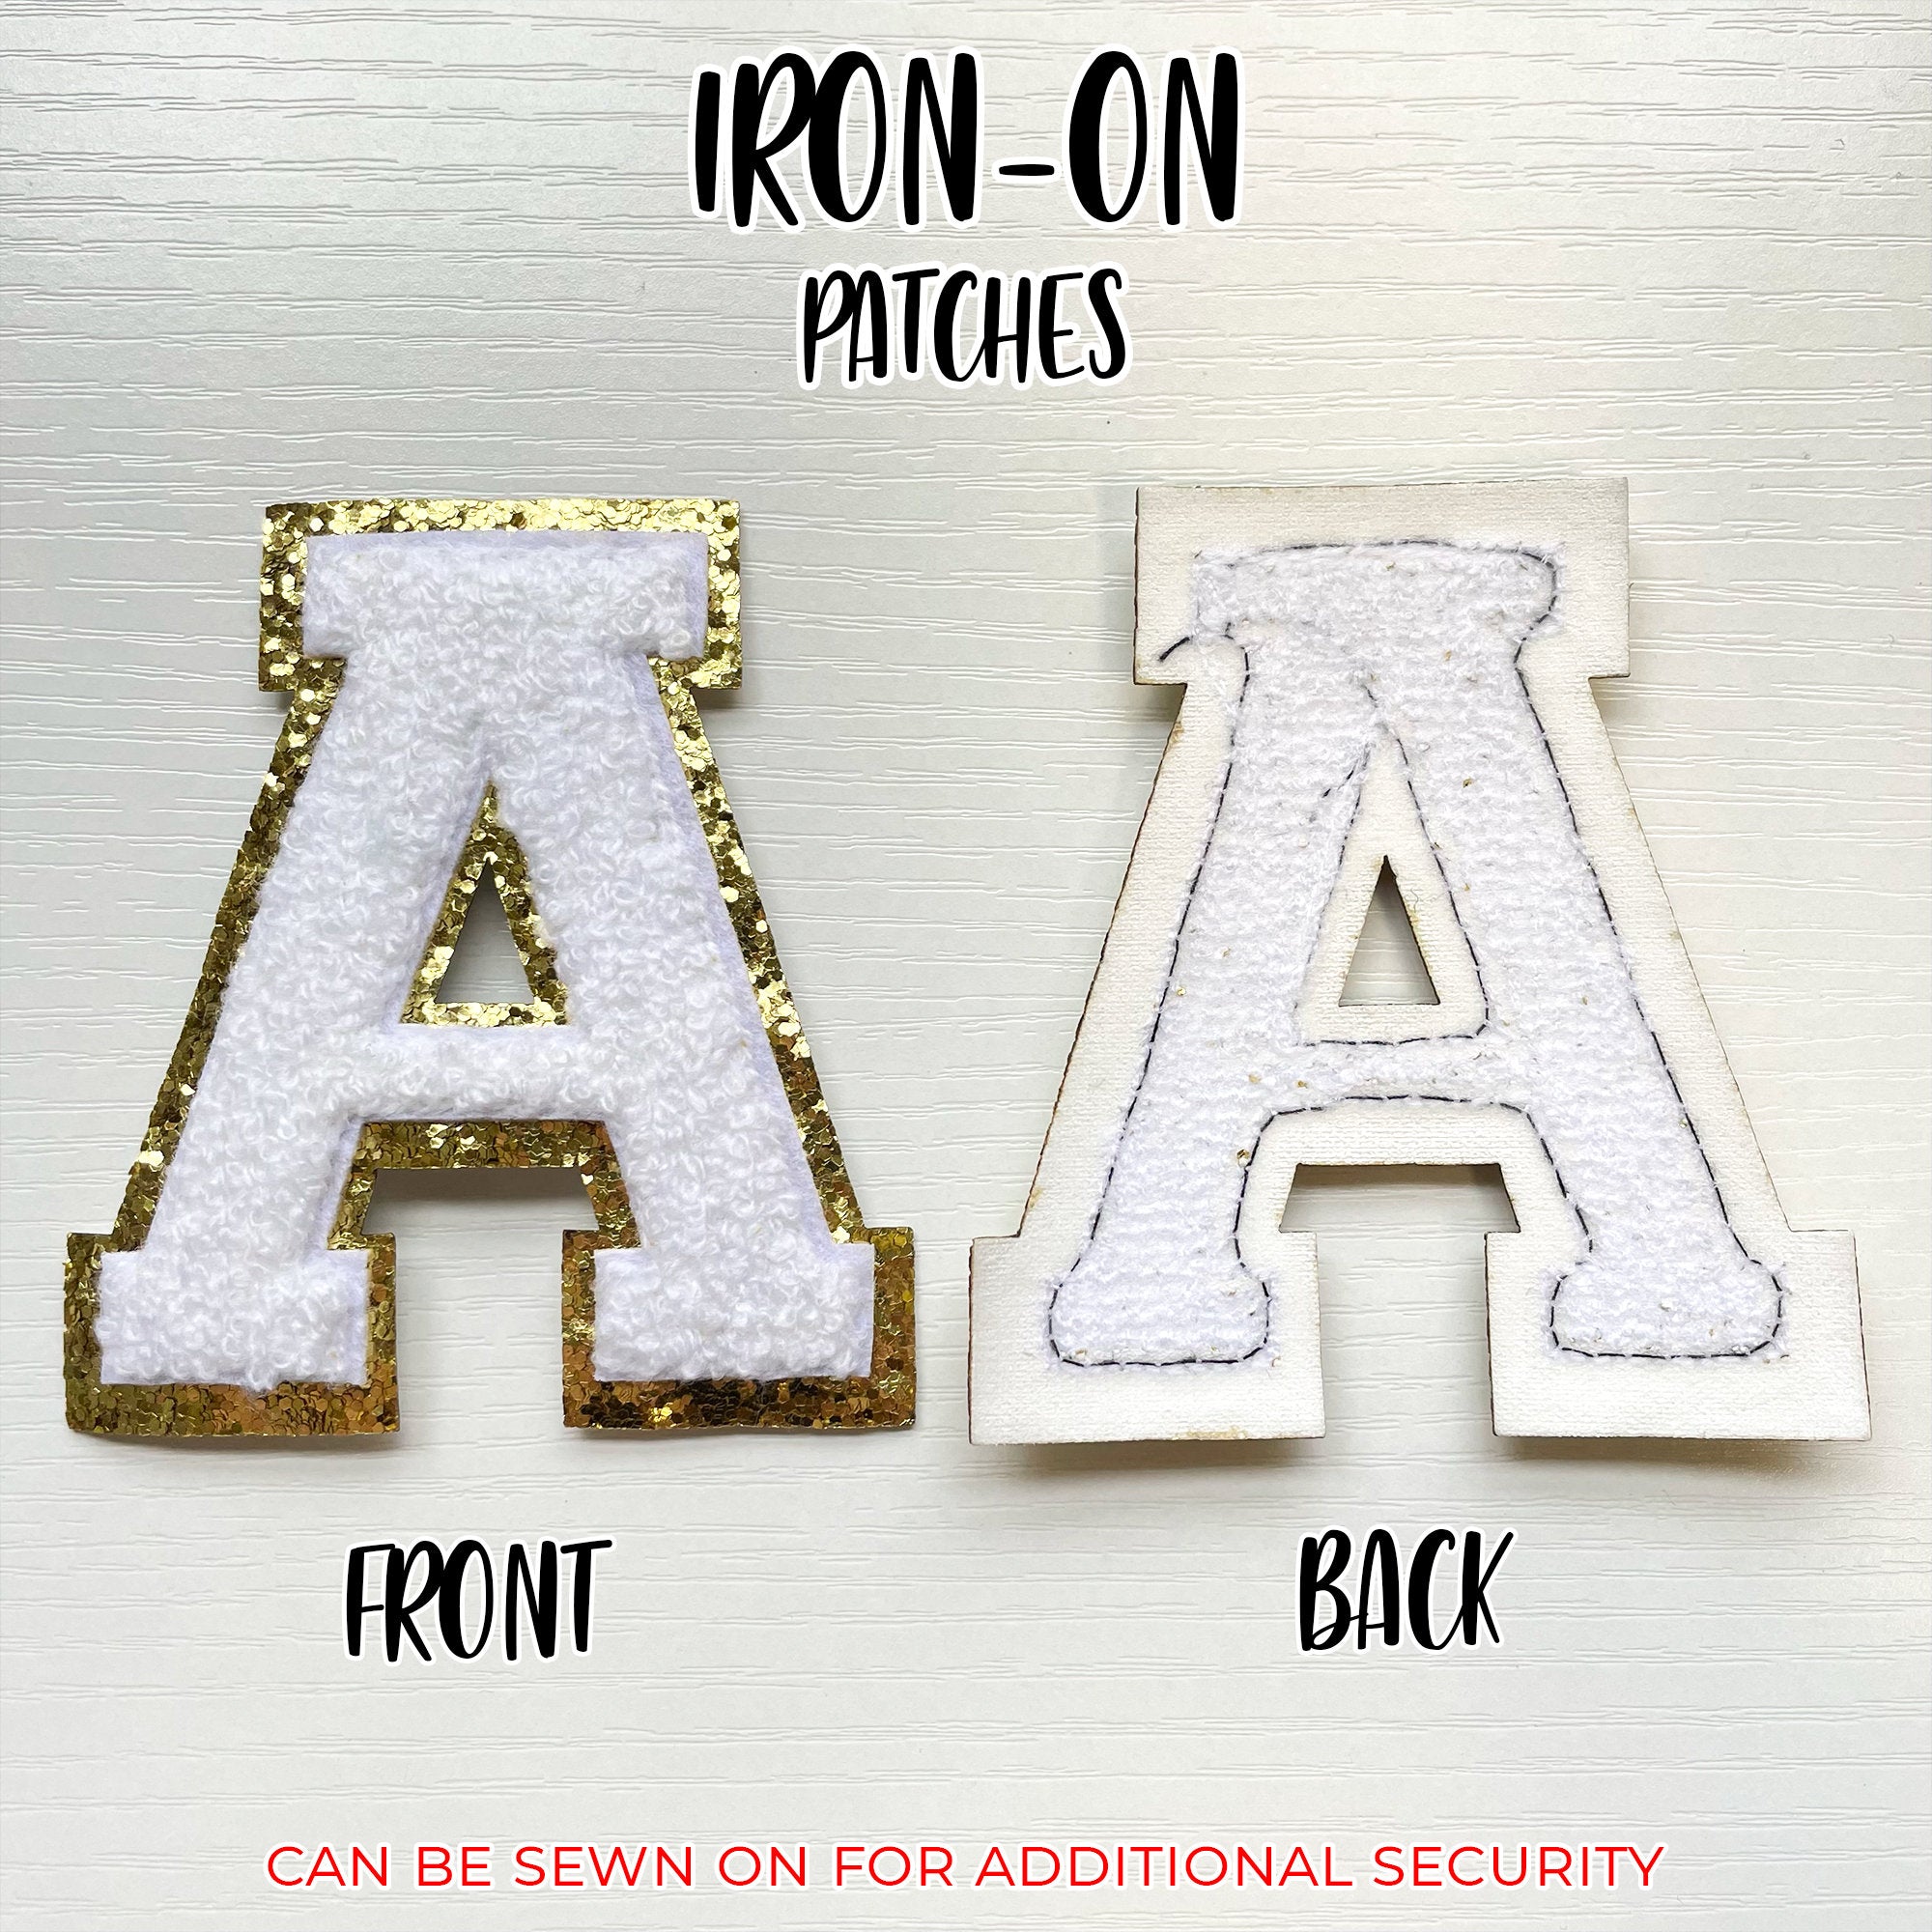 Iron-On Varsity Letter Patches, White Patches with Gold Trim, Chenille Patches, Glitter Letters, DIY Gift Ideas, Bachelorette Party Gift